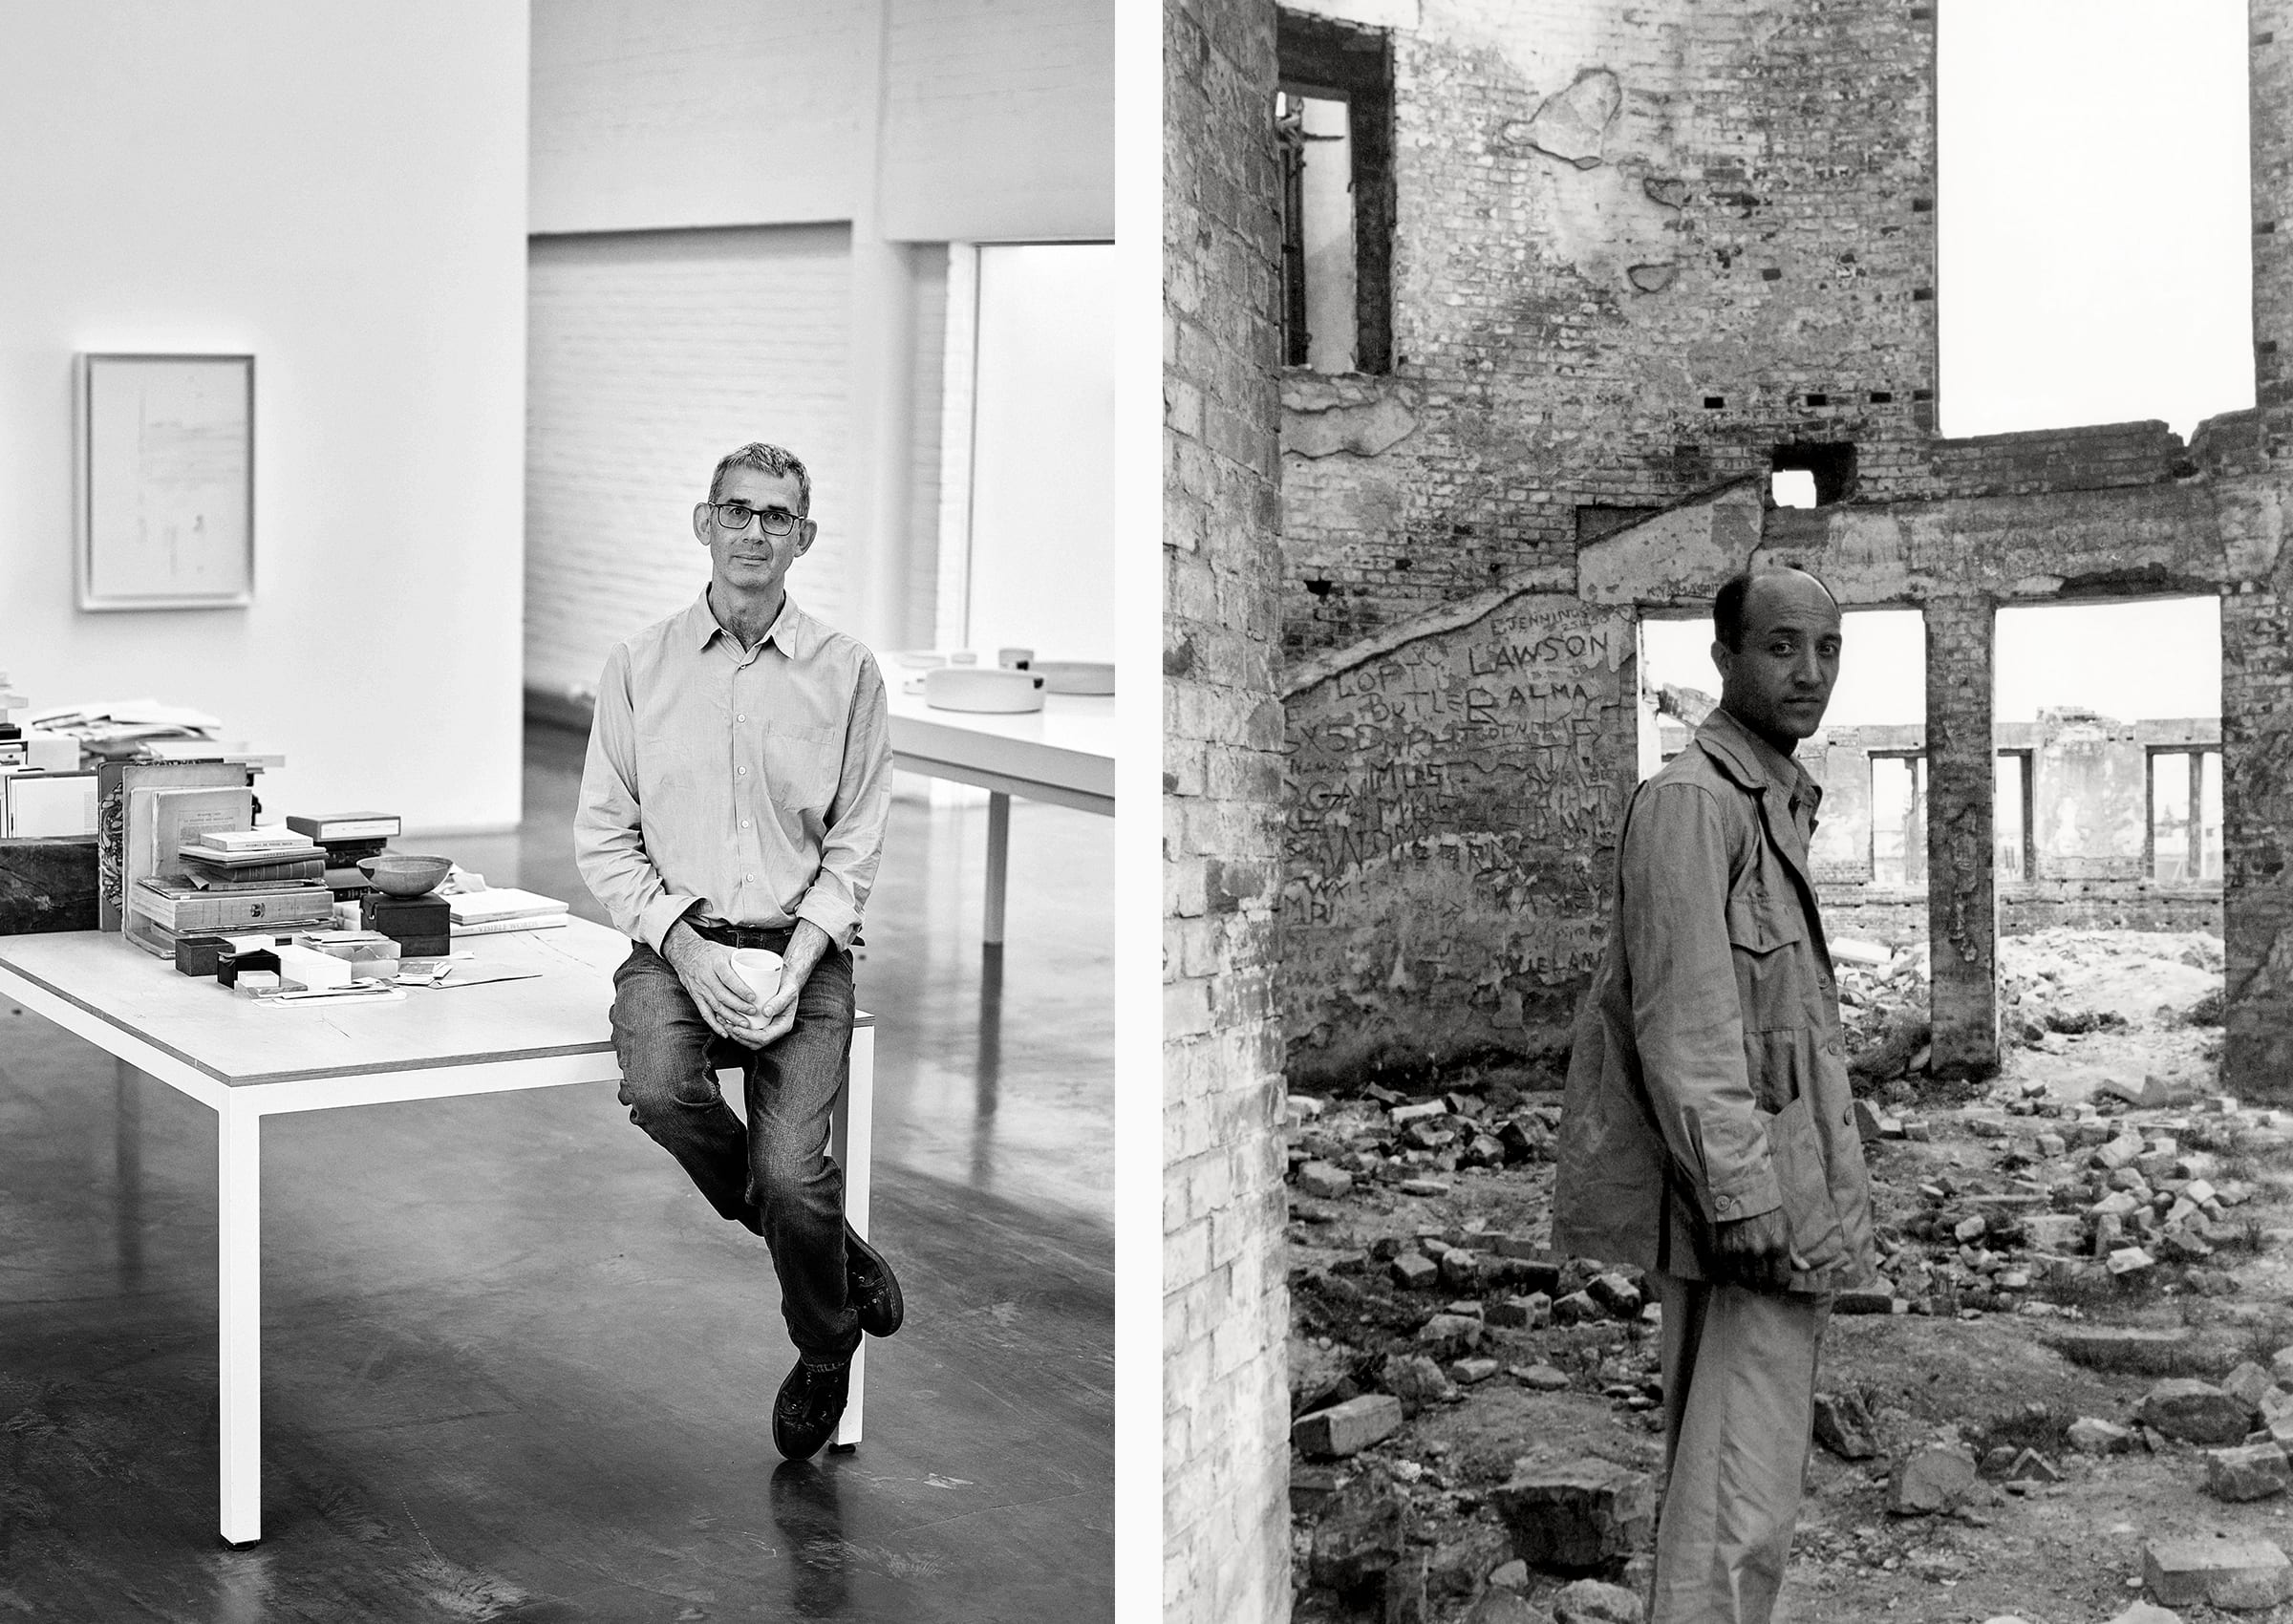 Left: Edmund de Waal. Photograph by Tom Jamieson. Right: Isamu Noguchi in the ruins of Hiroshima, 1951. The Noguchi Museum Archives, 05431. © The Isamu Noguchi Foundation and Garden Museum, NY / Artists Rights Society (ARS).